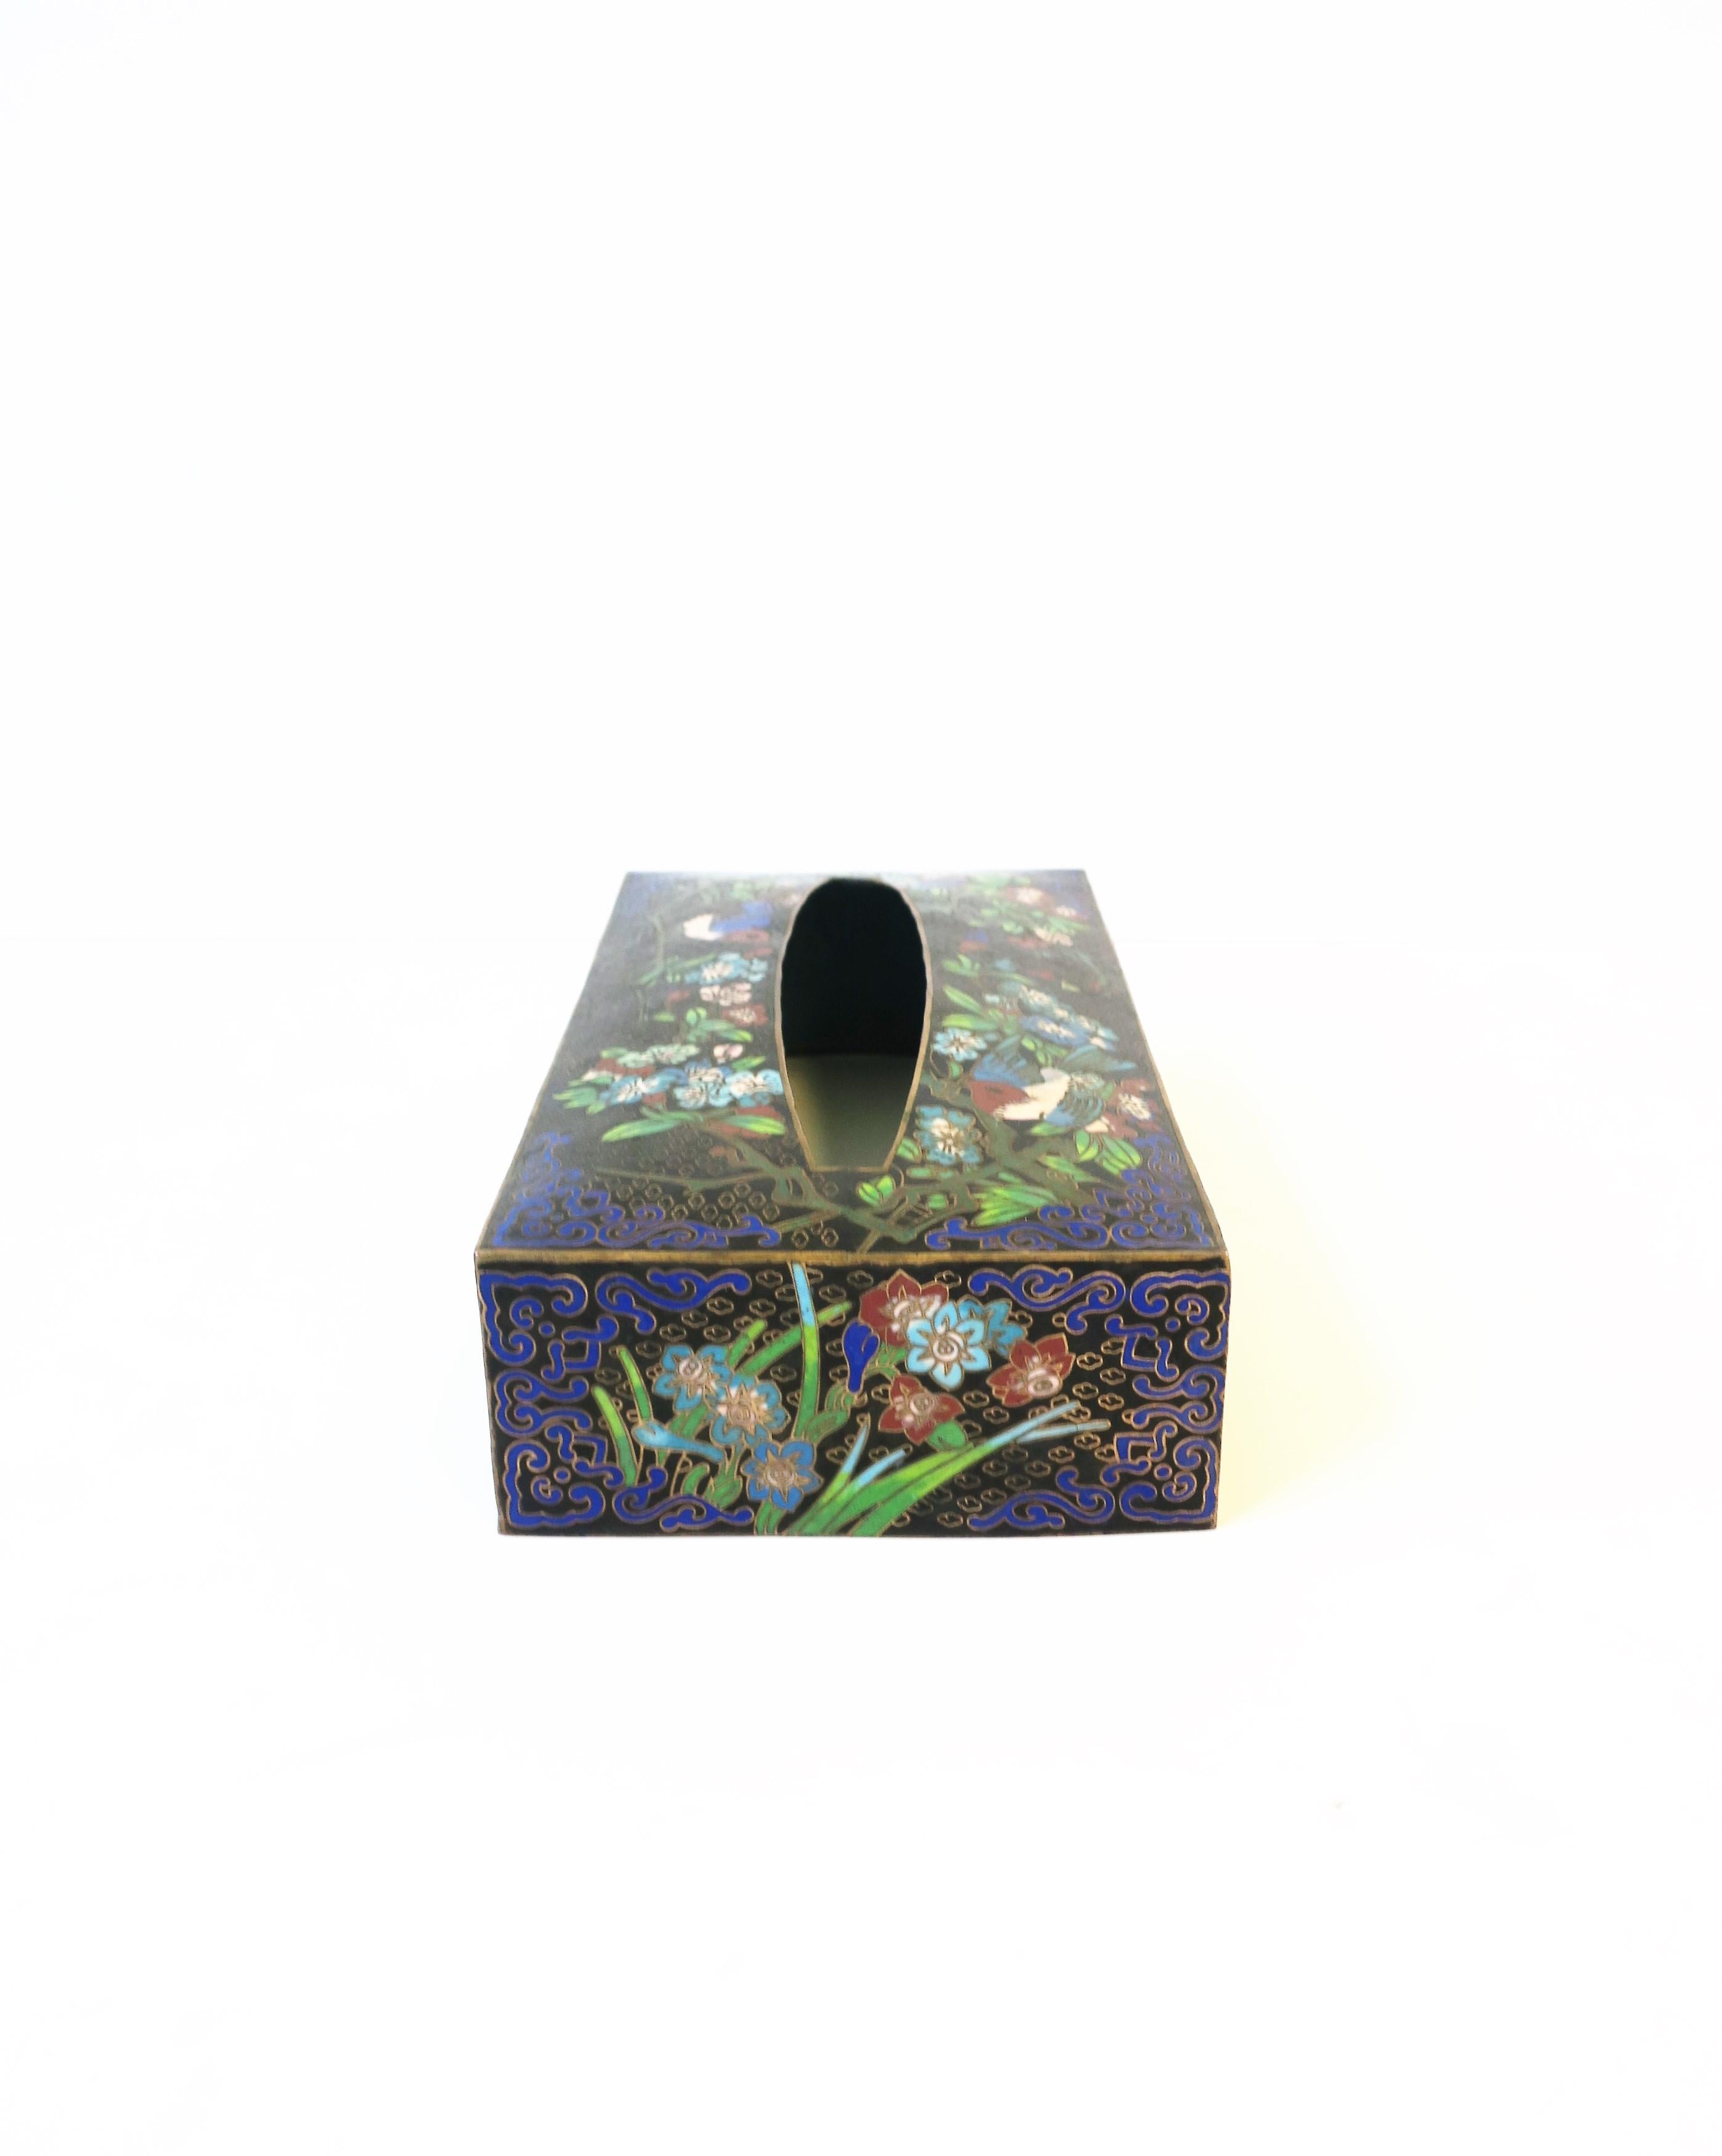 Cloissoné Brass and Cloisonné Enamel Tissue Box Holder Cover with Birds and Flowers